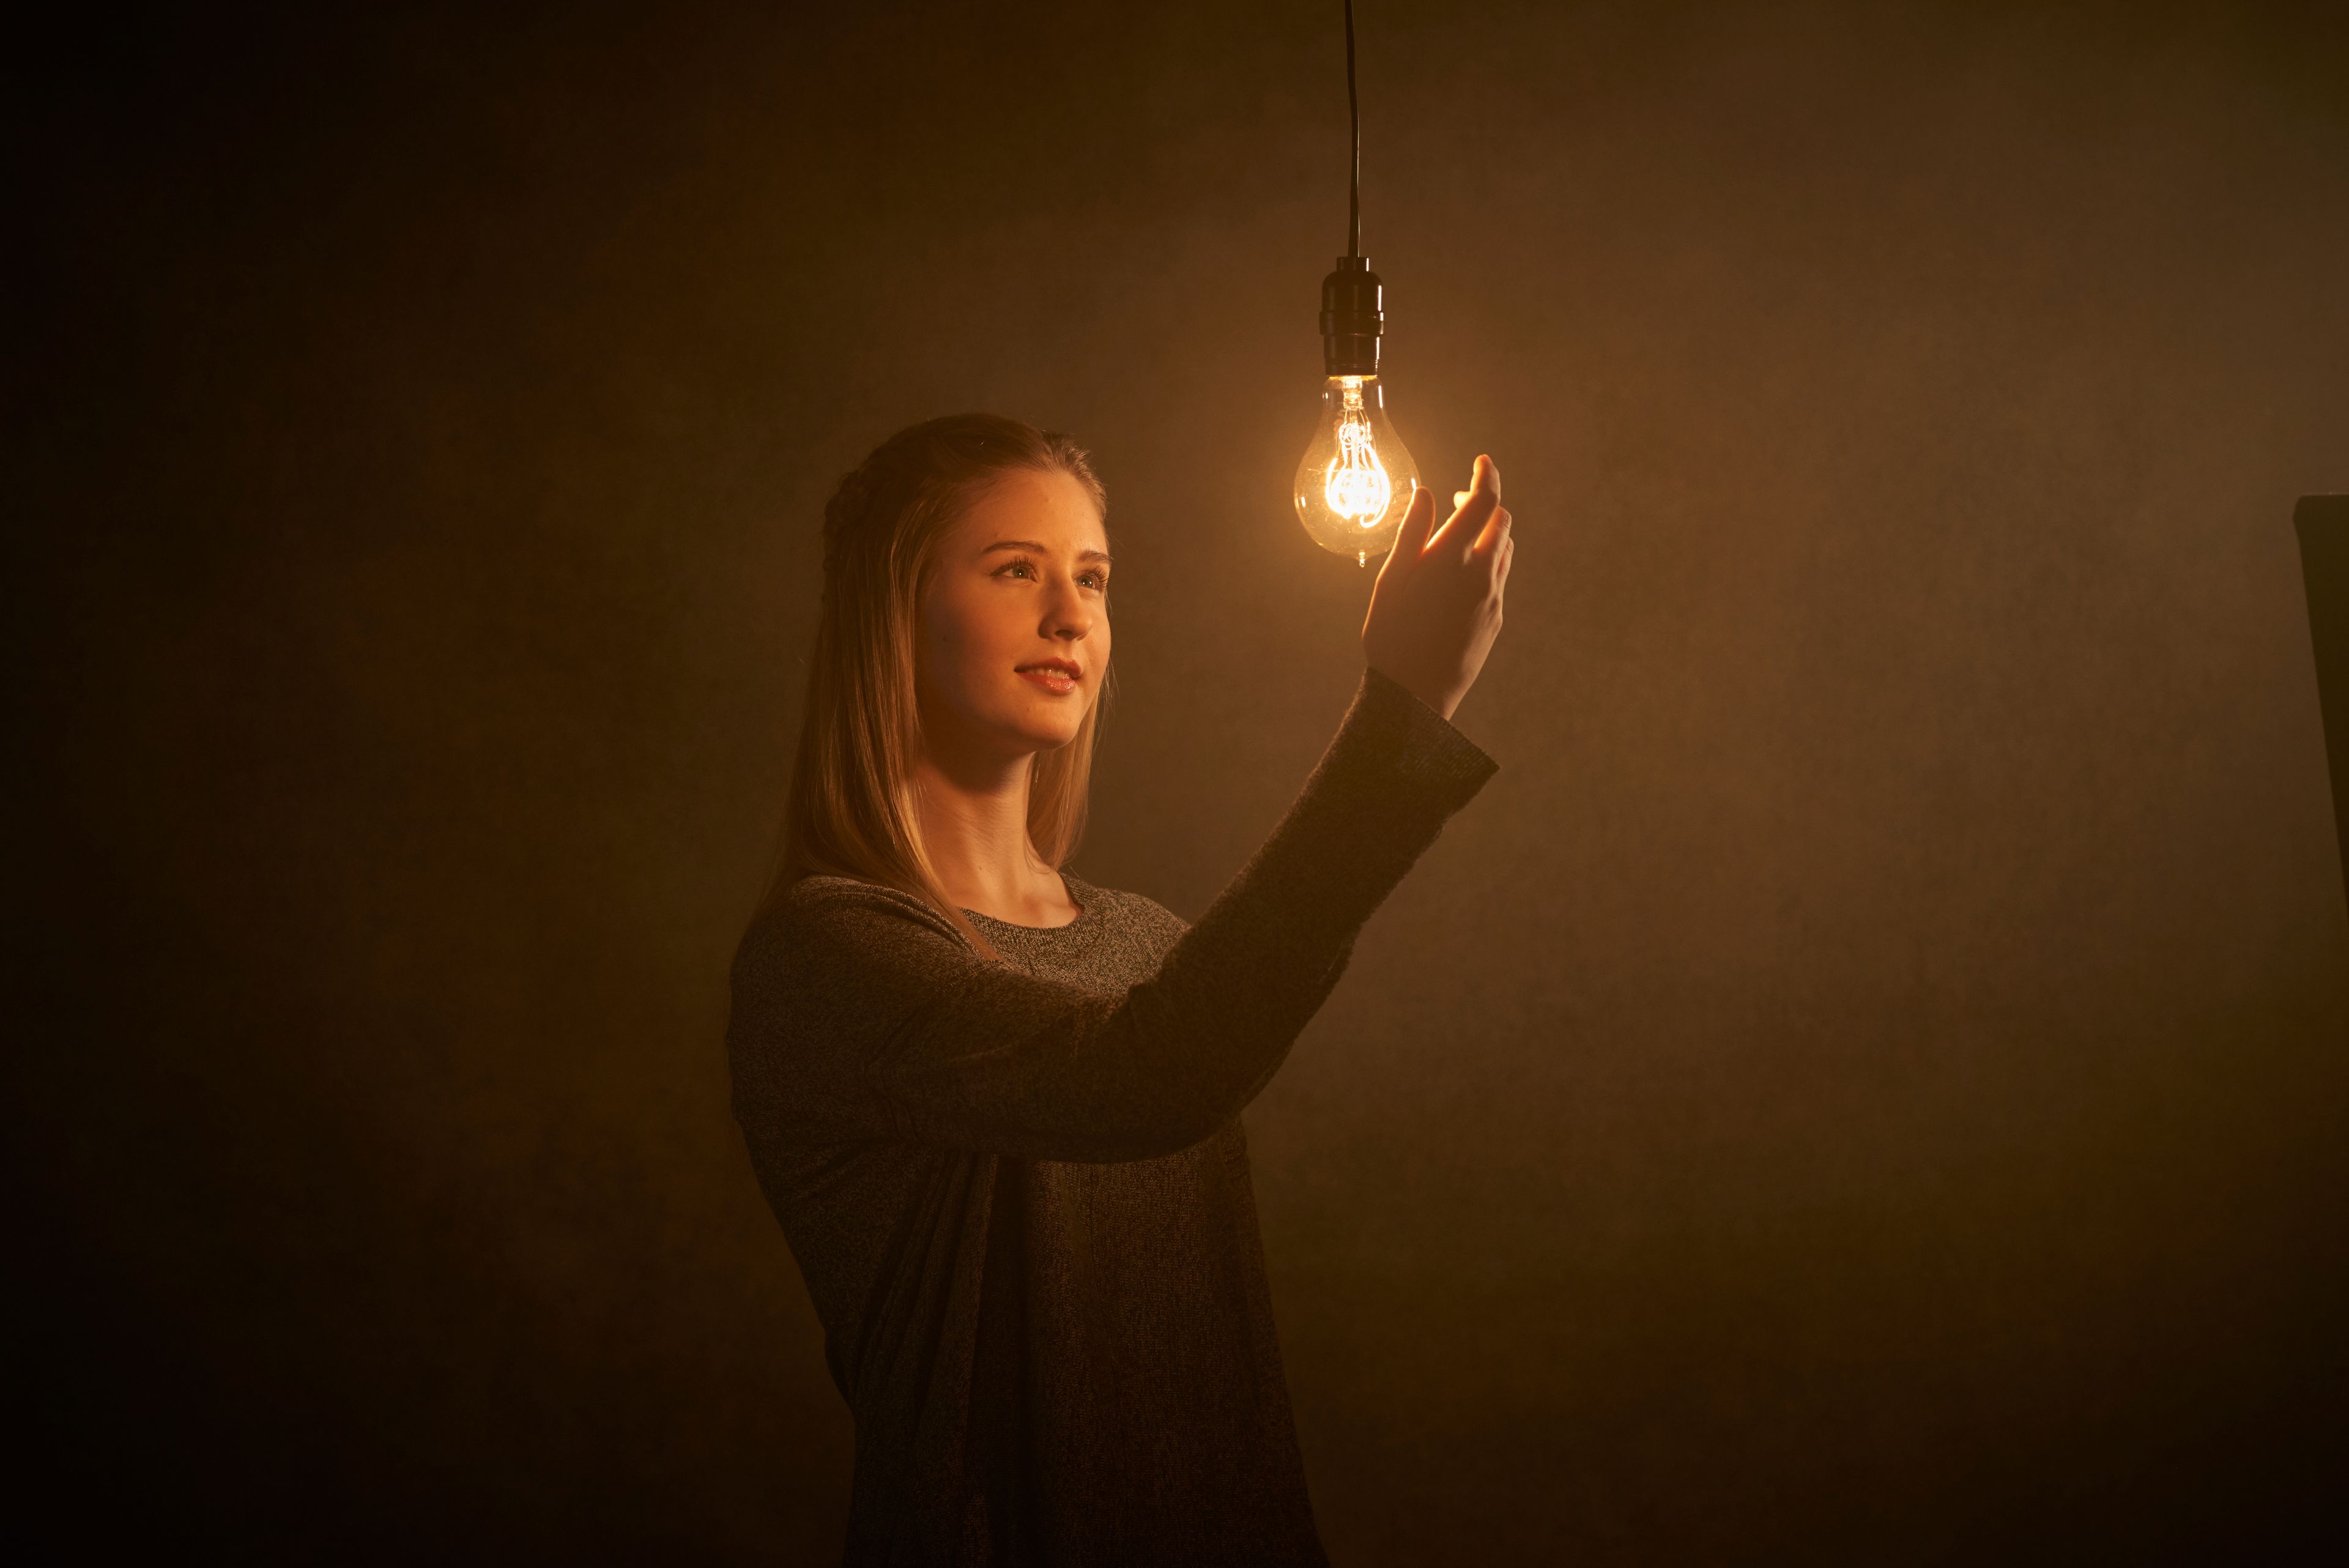 A young woman in a dark room reaching out toward an illuminated light bulb.